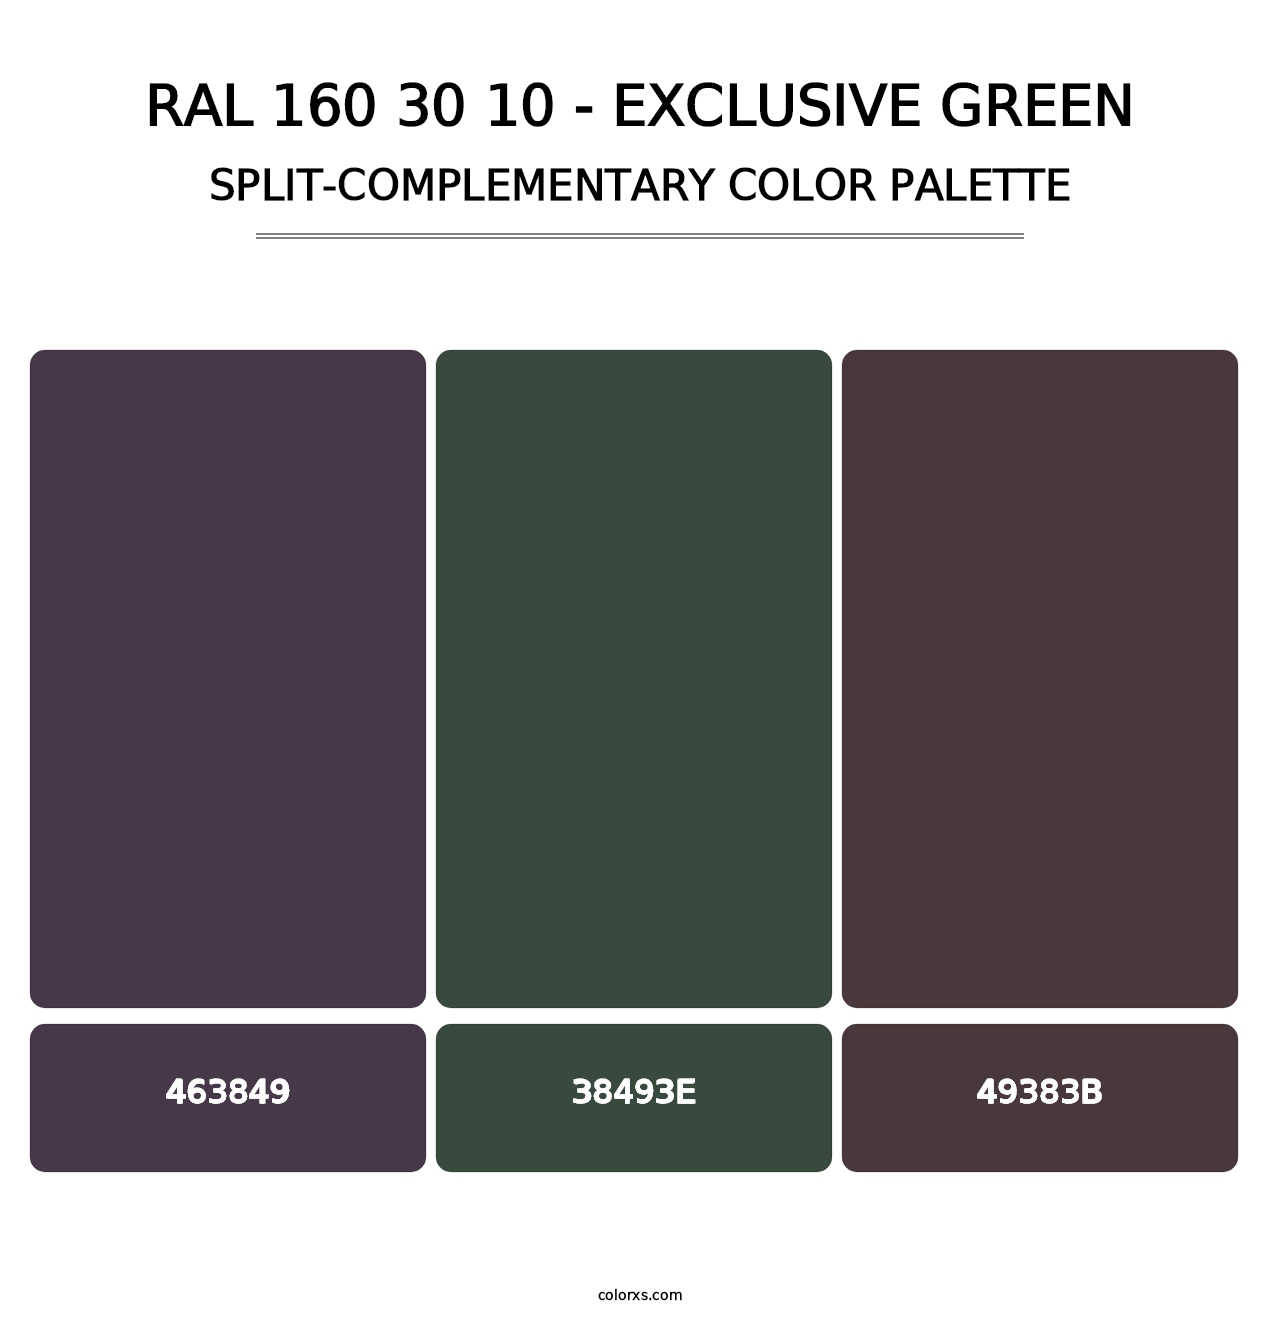 RAL 160 30 10 - Exclusive Green - Split-Complementary Color Palette